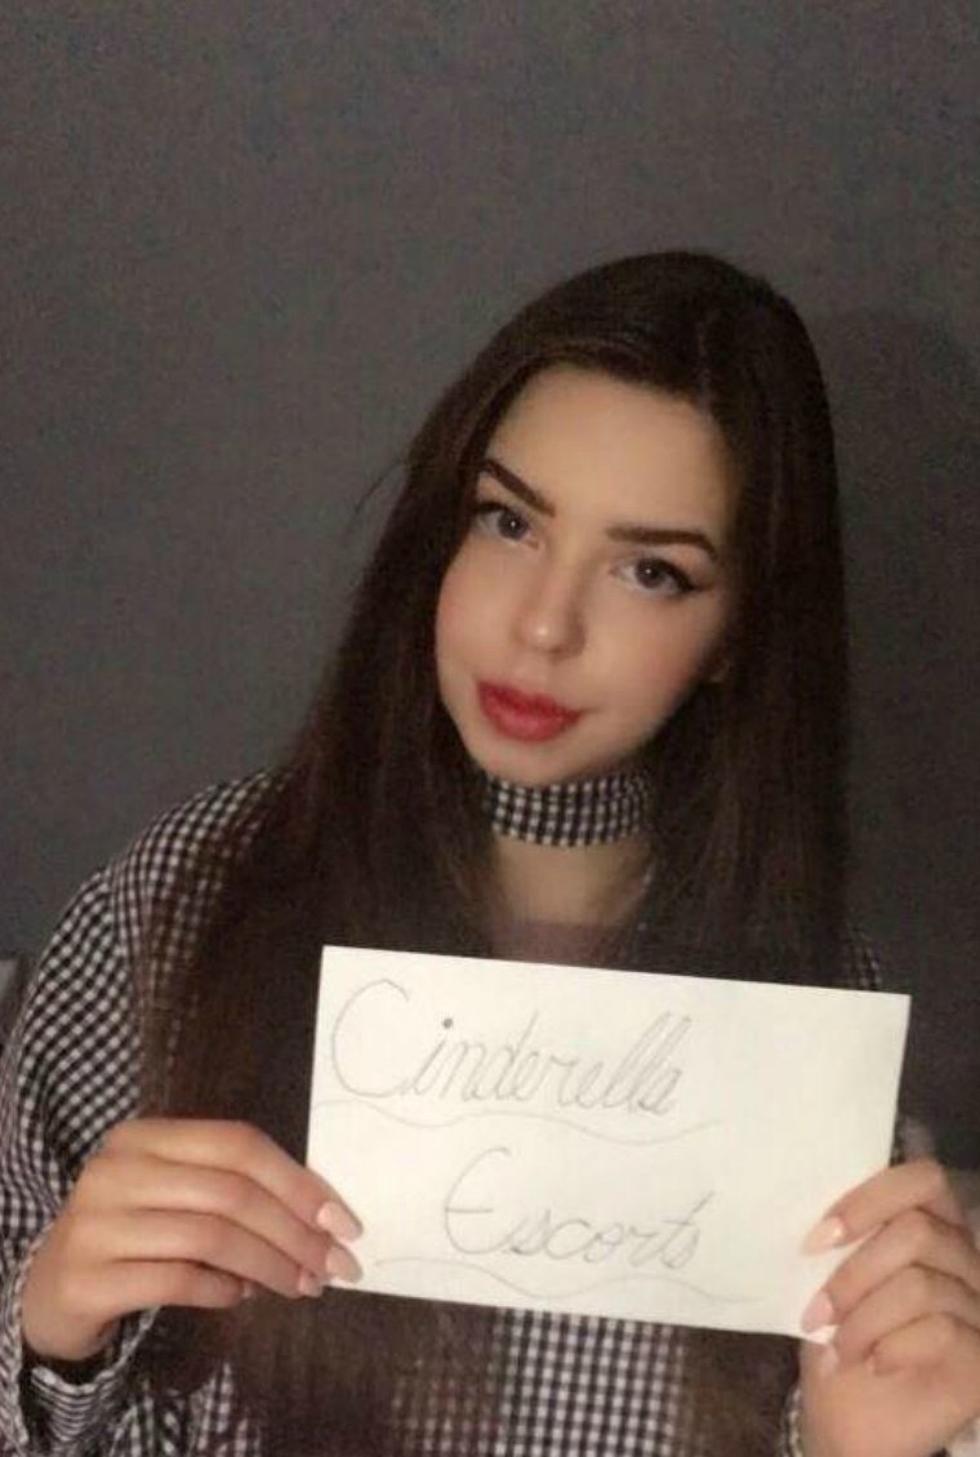 19-Year-Old Model Sells Virginity Online For 2.9M